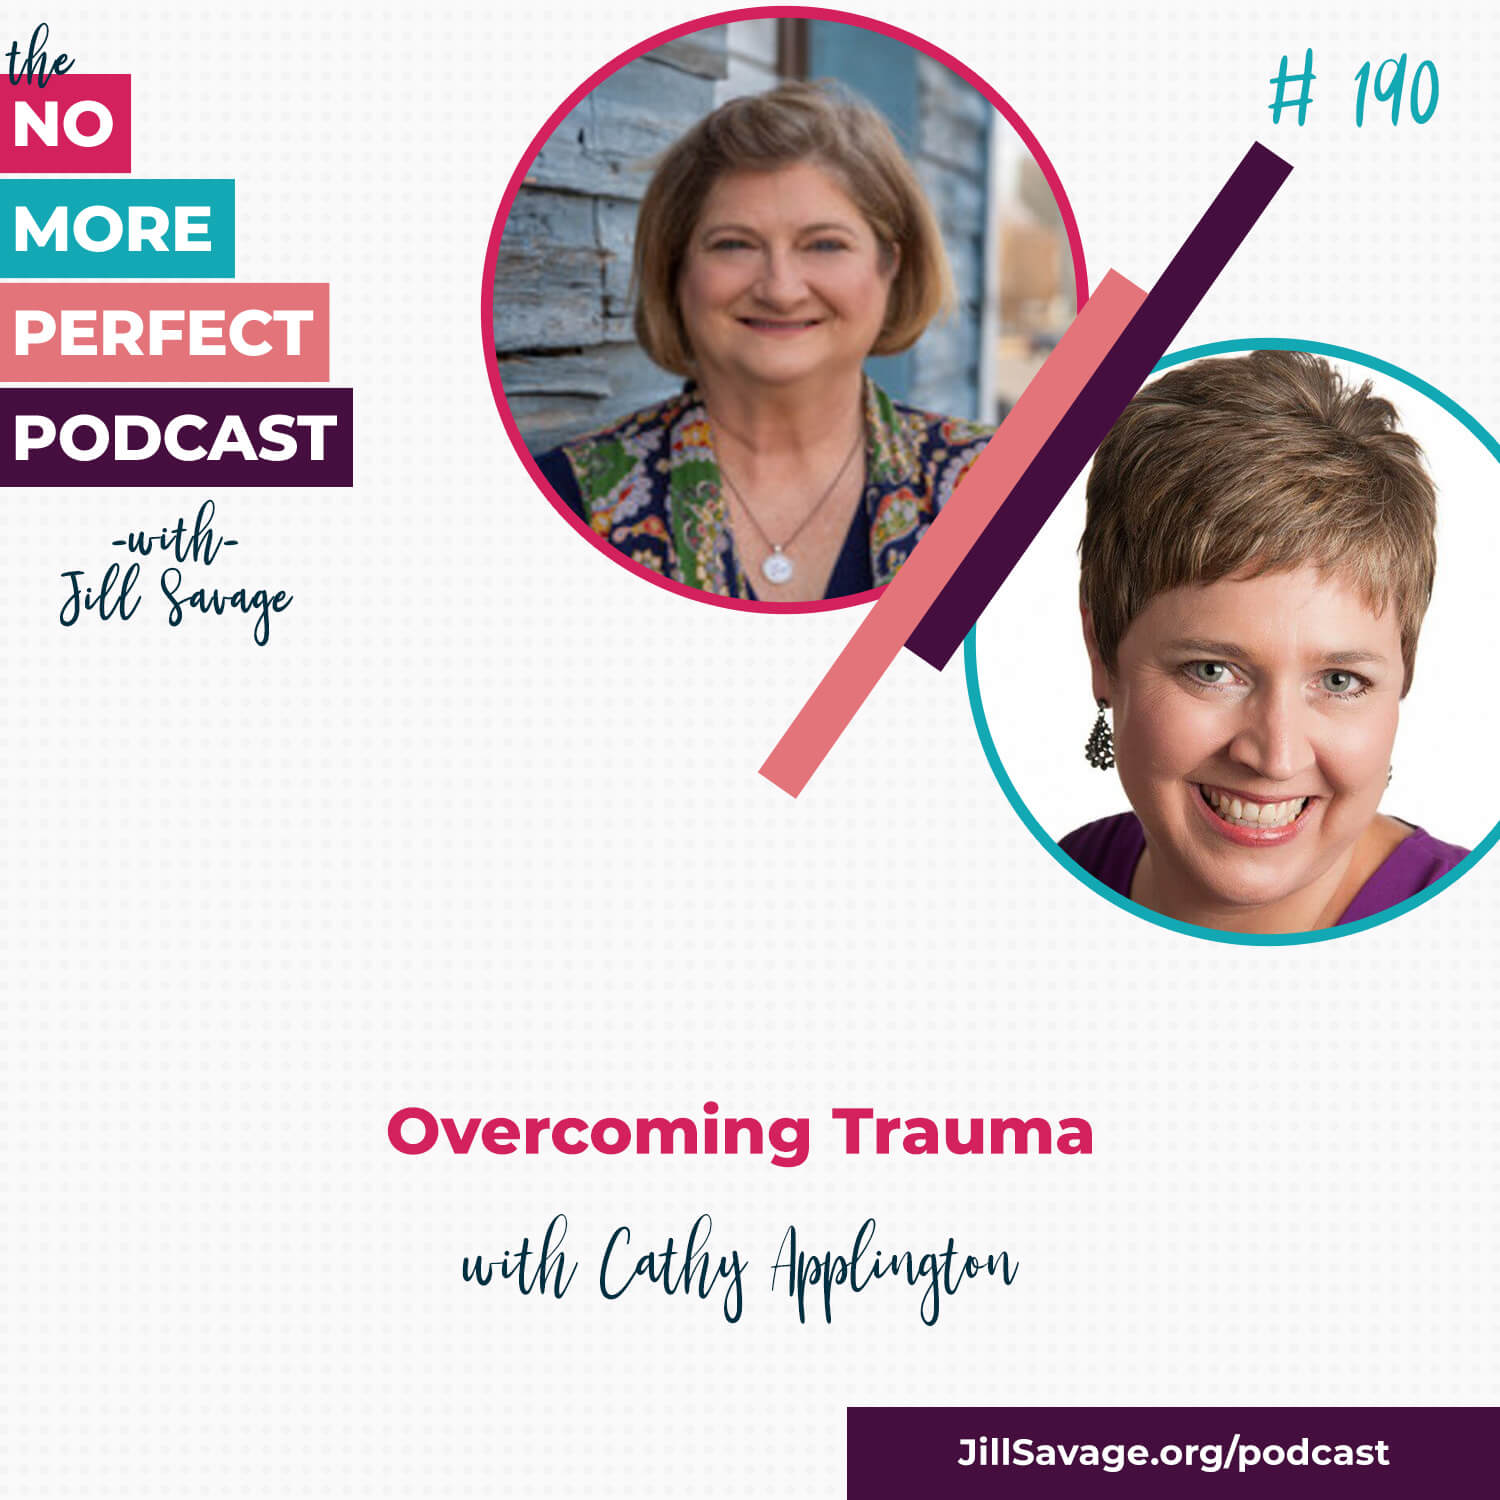 Overcoming Trauma with Cathy Applington | Episode 190